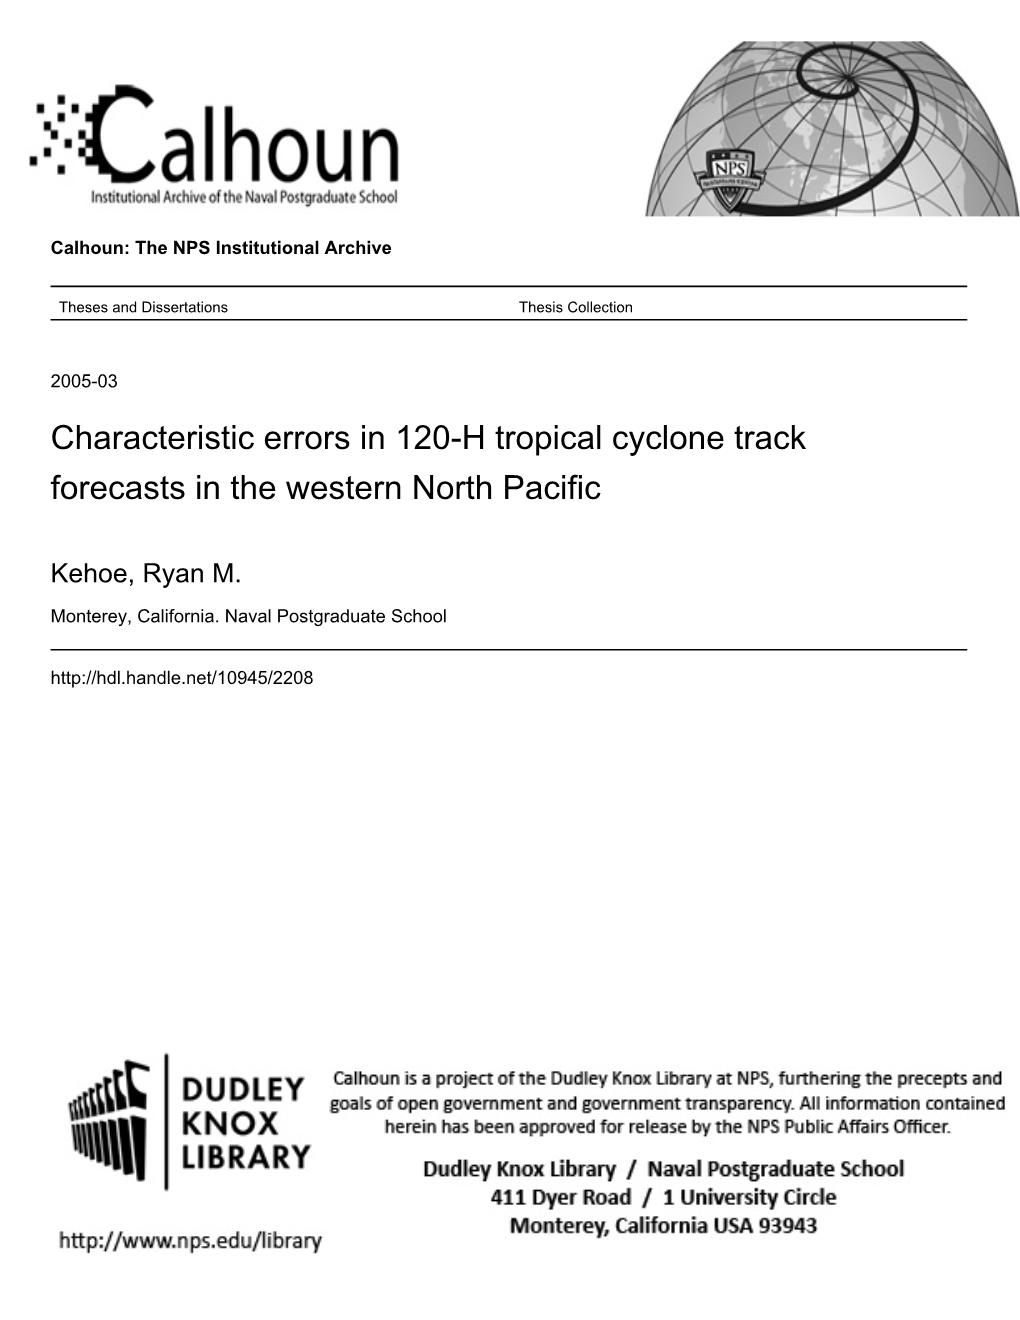 Characteristic Errors in 120-H Tropical Cyclone Track Forecasts in the Western North Pacific